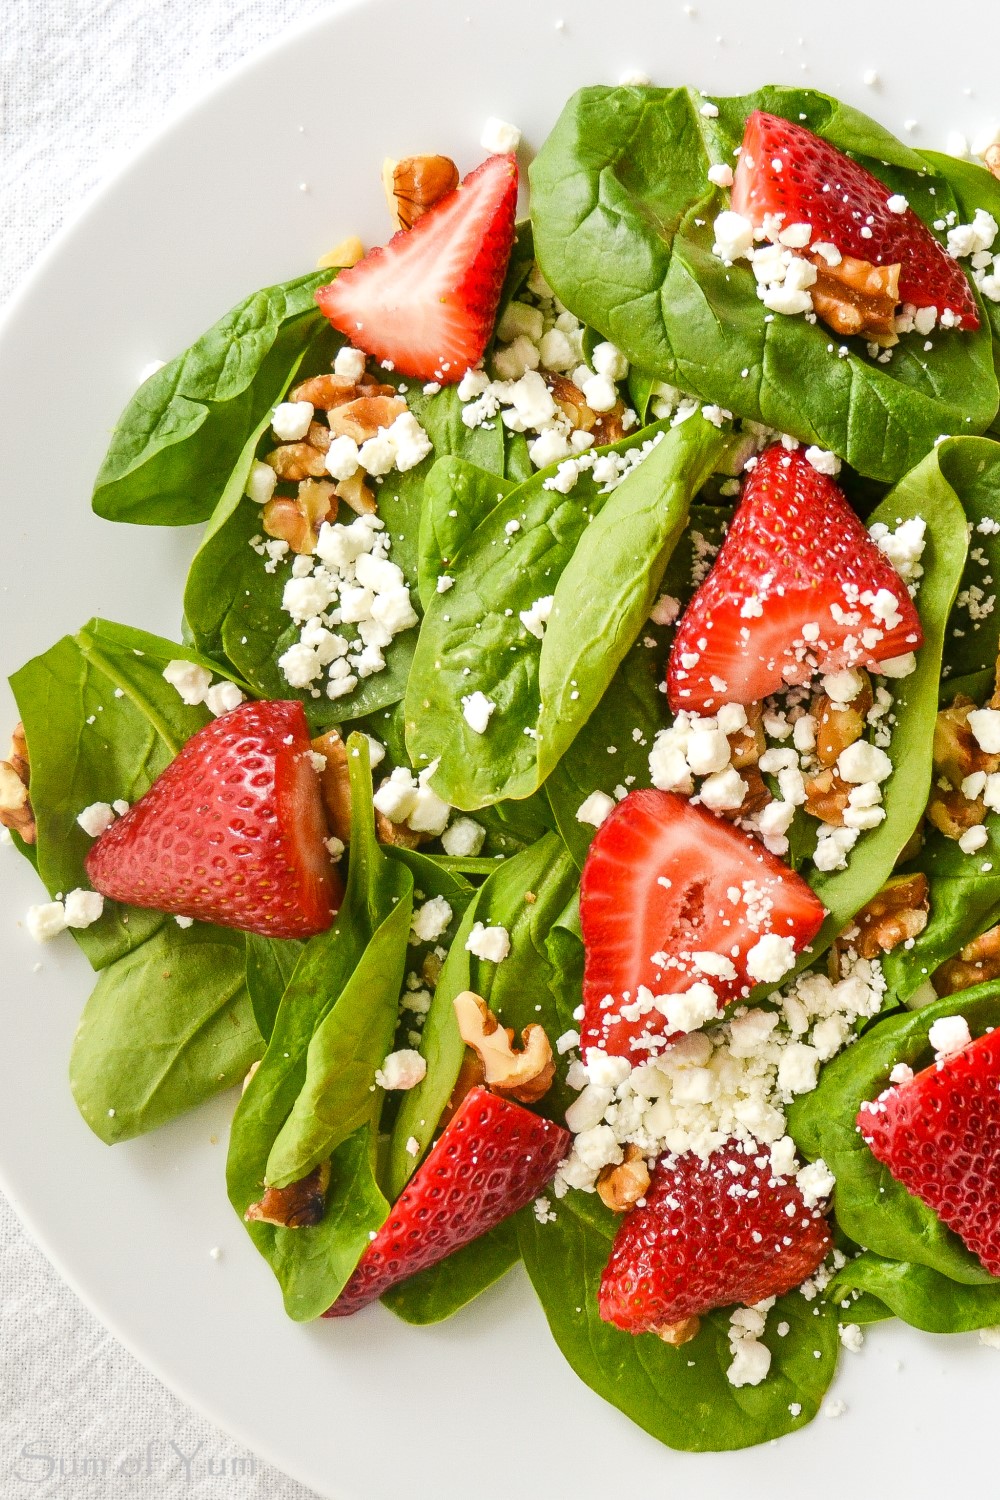 Strawberry Spinach Salad with Homemade Balsamic Vinaigrette 